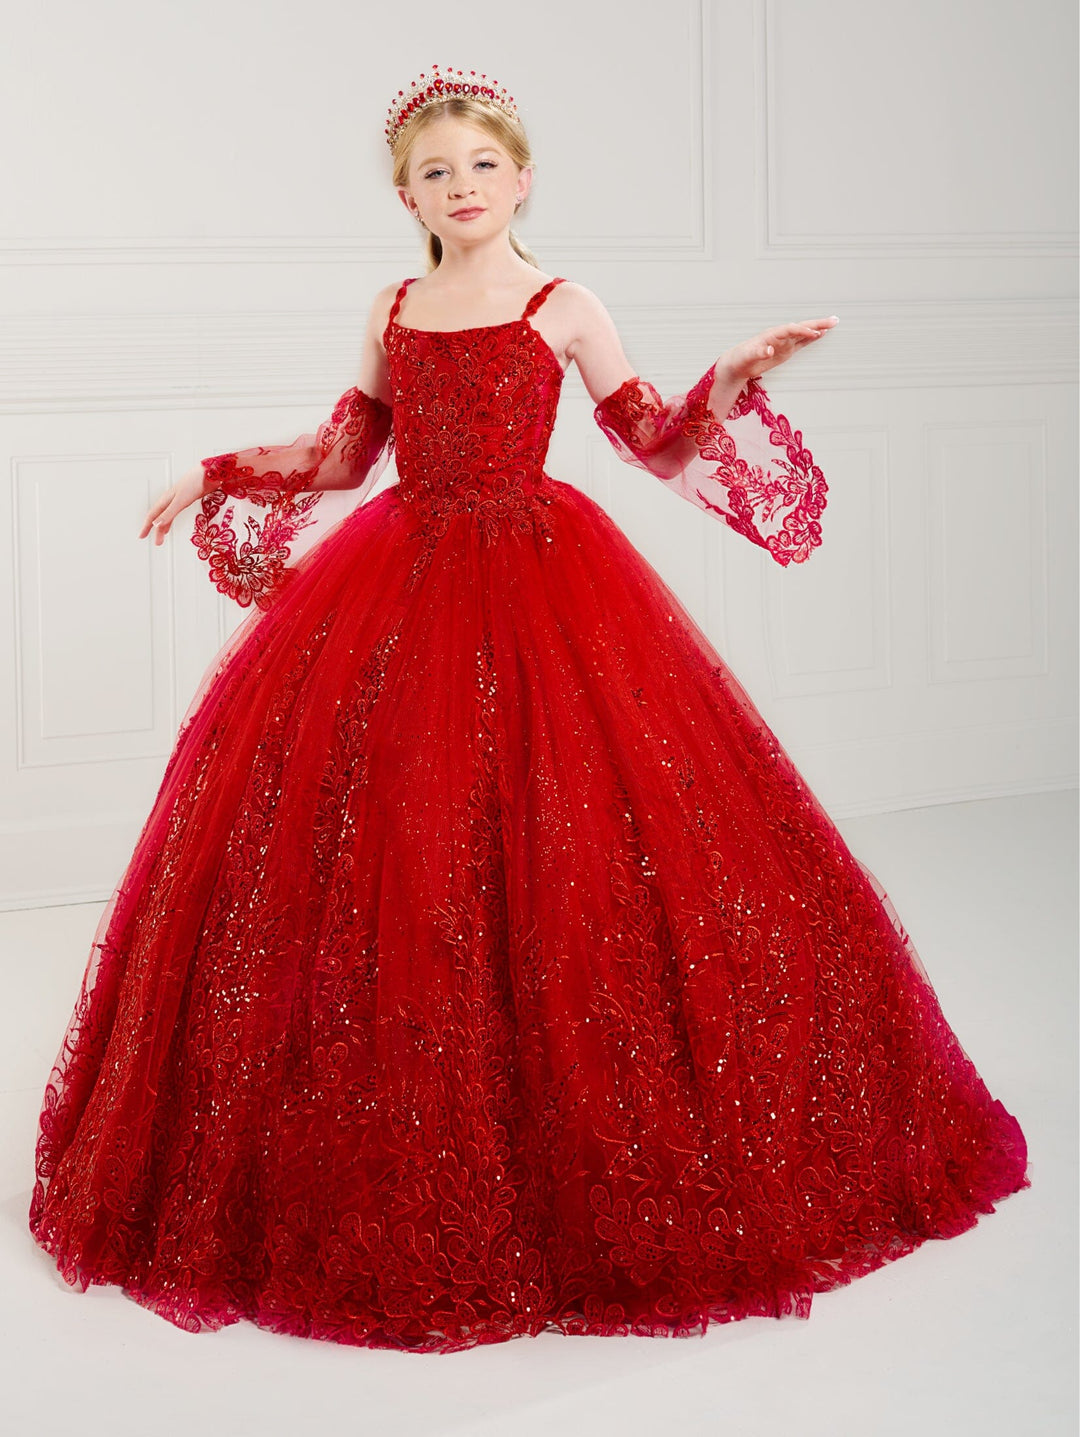 Girls Applique Bell Sleeve Gown by Tiffany Princess 13743